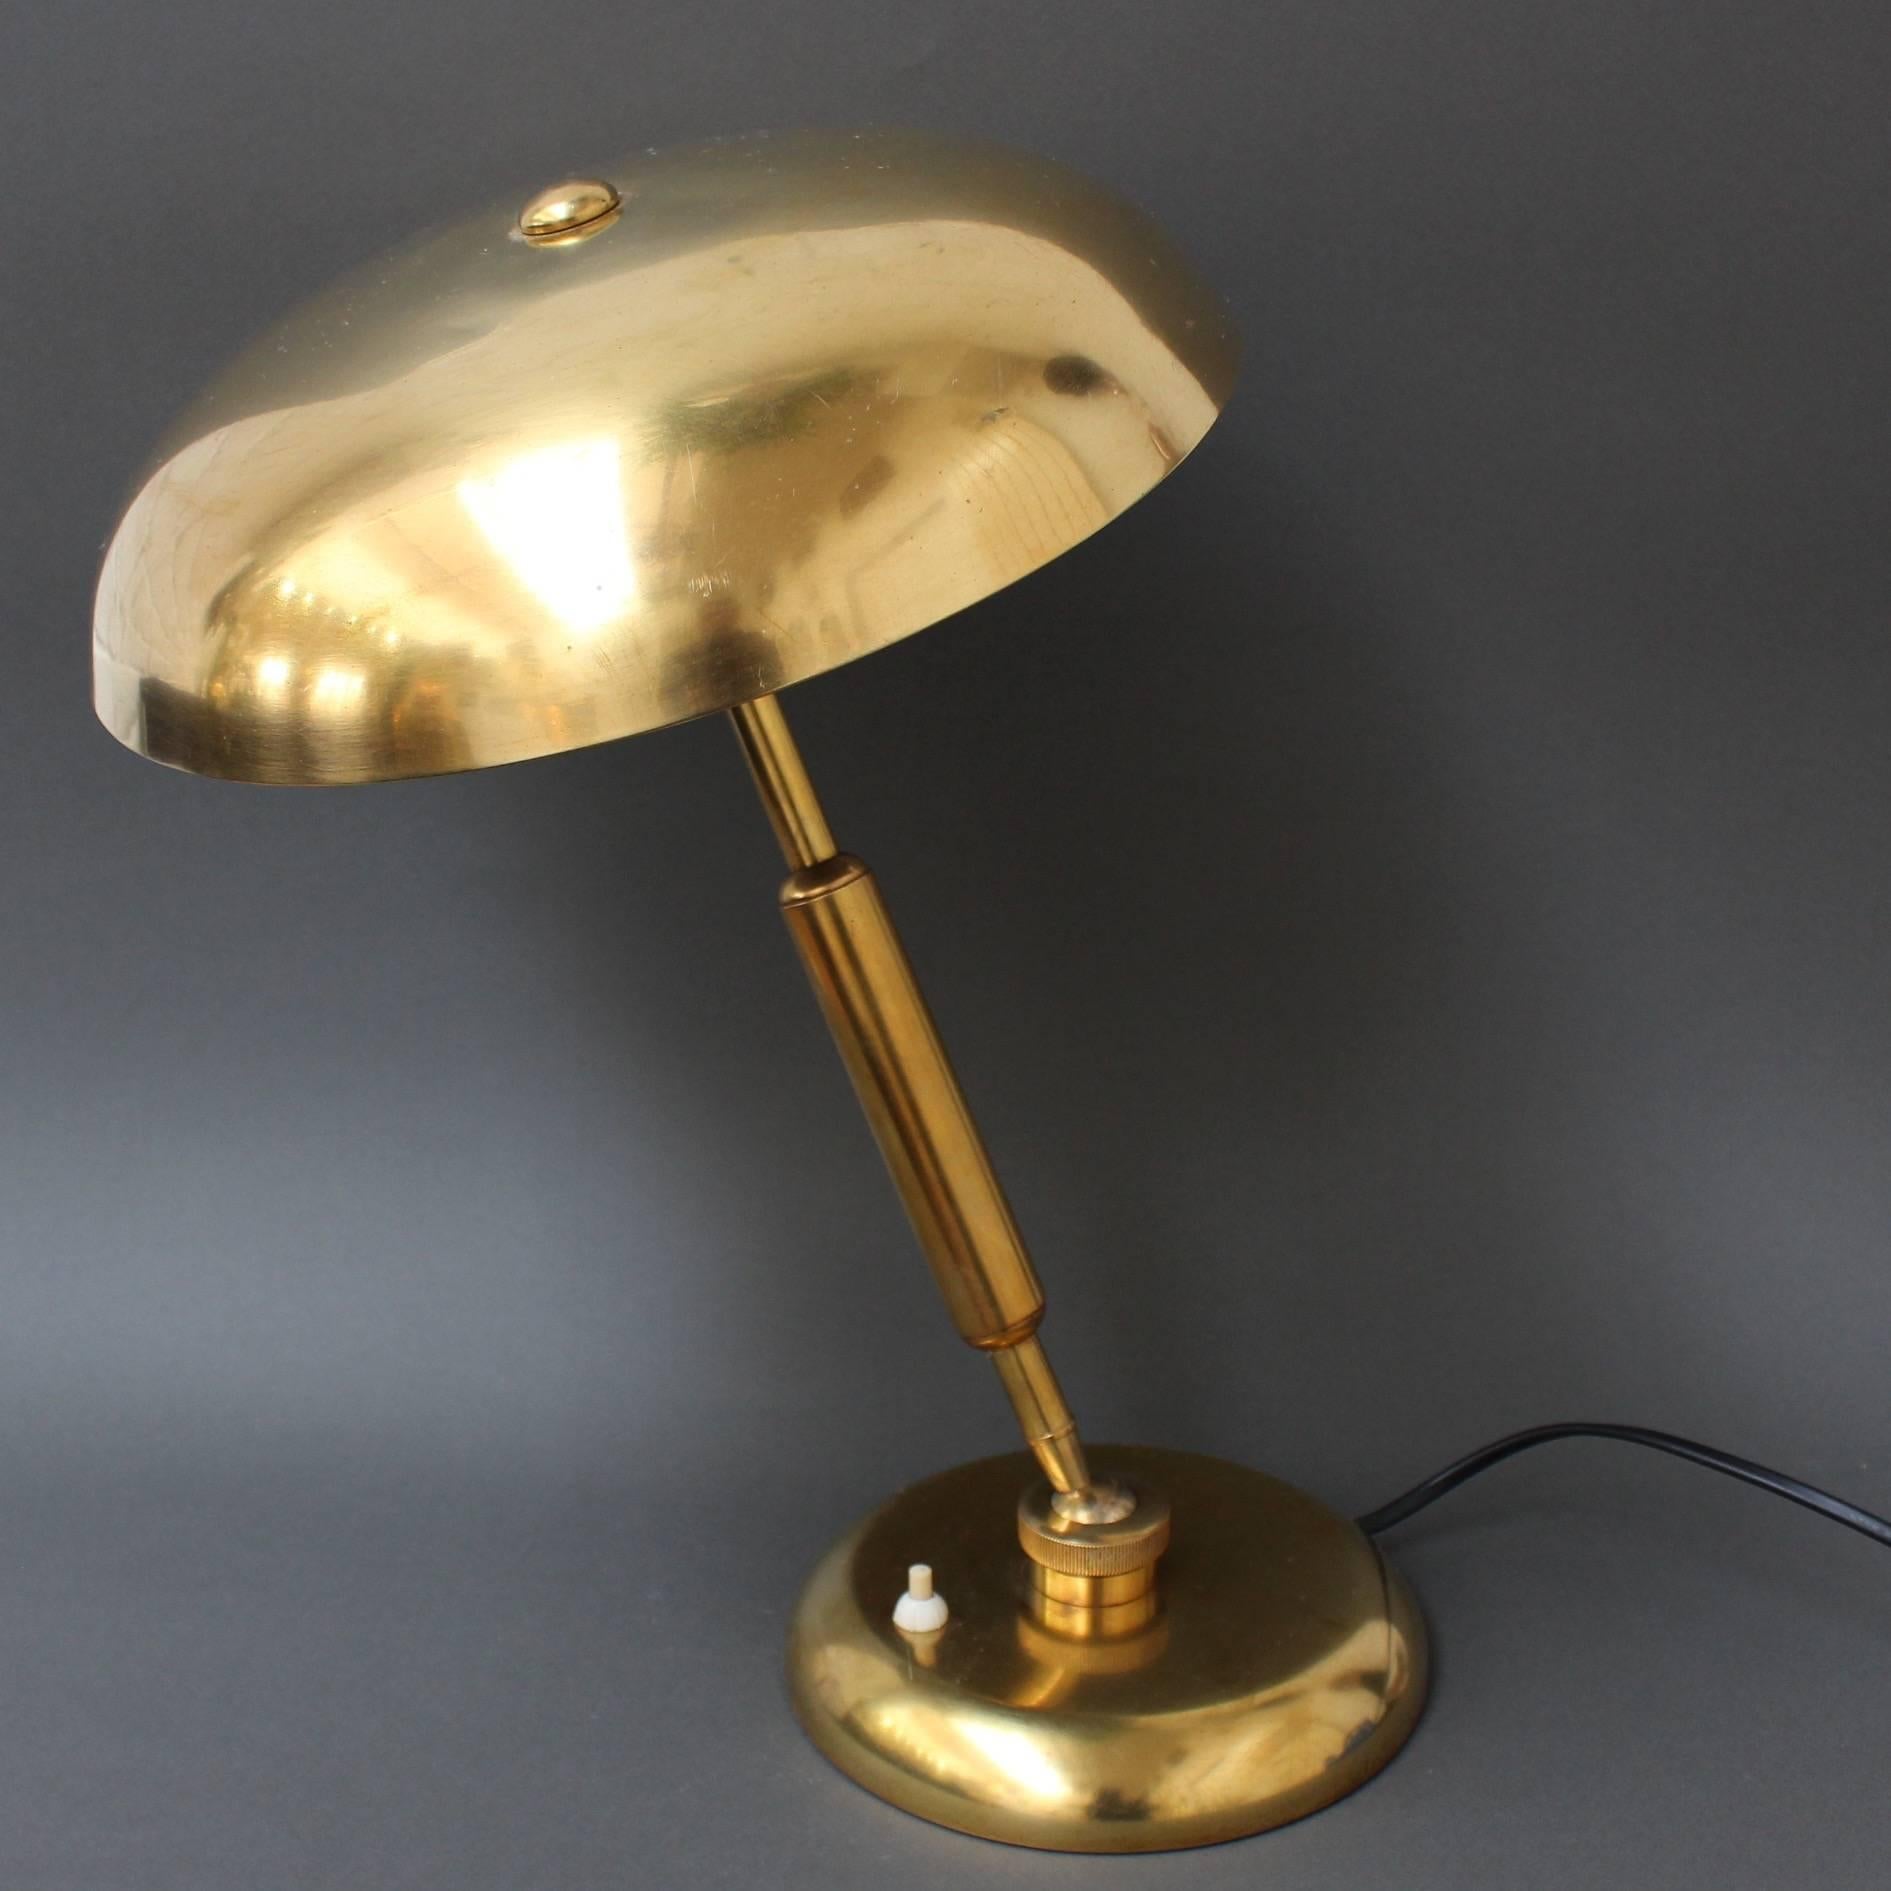 Pre-war Italian brass desk lamp, circa 1940s. A classic desk lamp which combines the characteristics of the Art Deco and Art Nouveau movements. A Lariolux ministeriale rounded shade tops an adjustable brass support stem. The brass features a